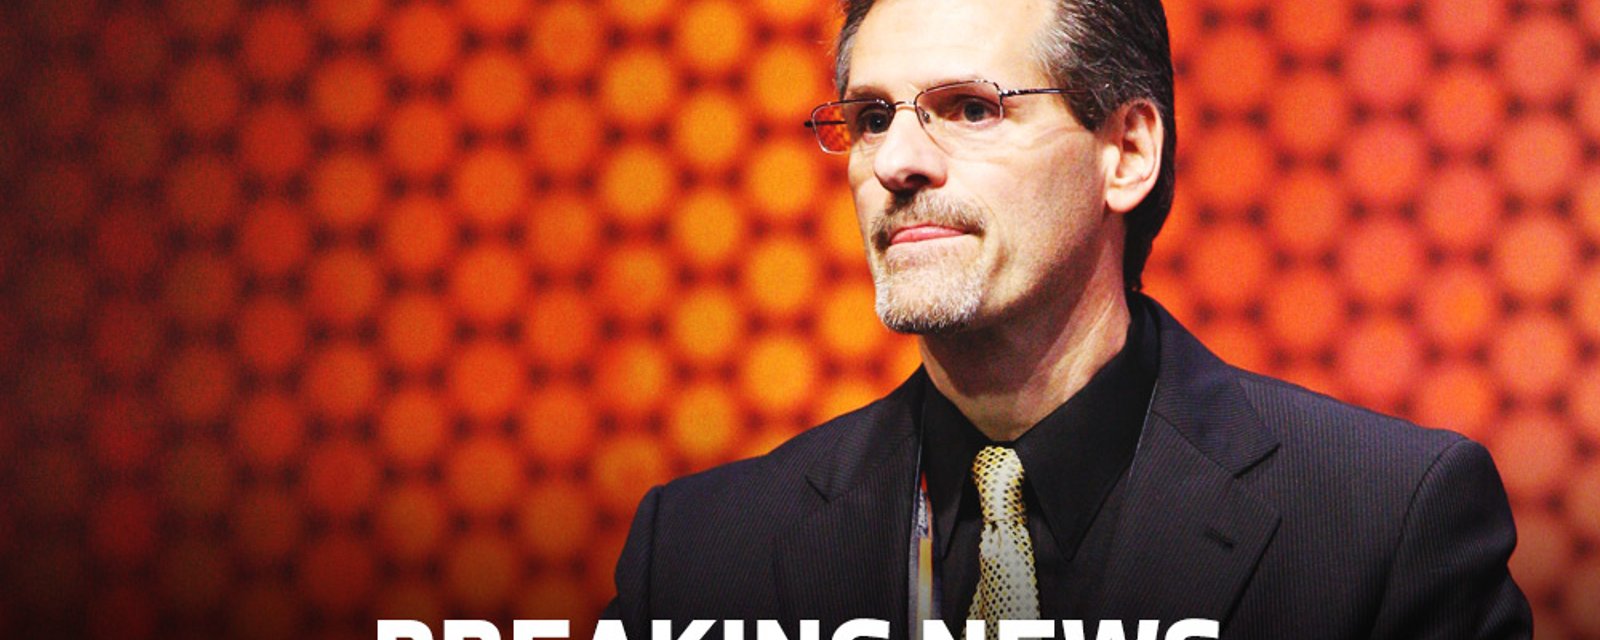 GM Ron Hextall confirms he is shutting down one of his players.